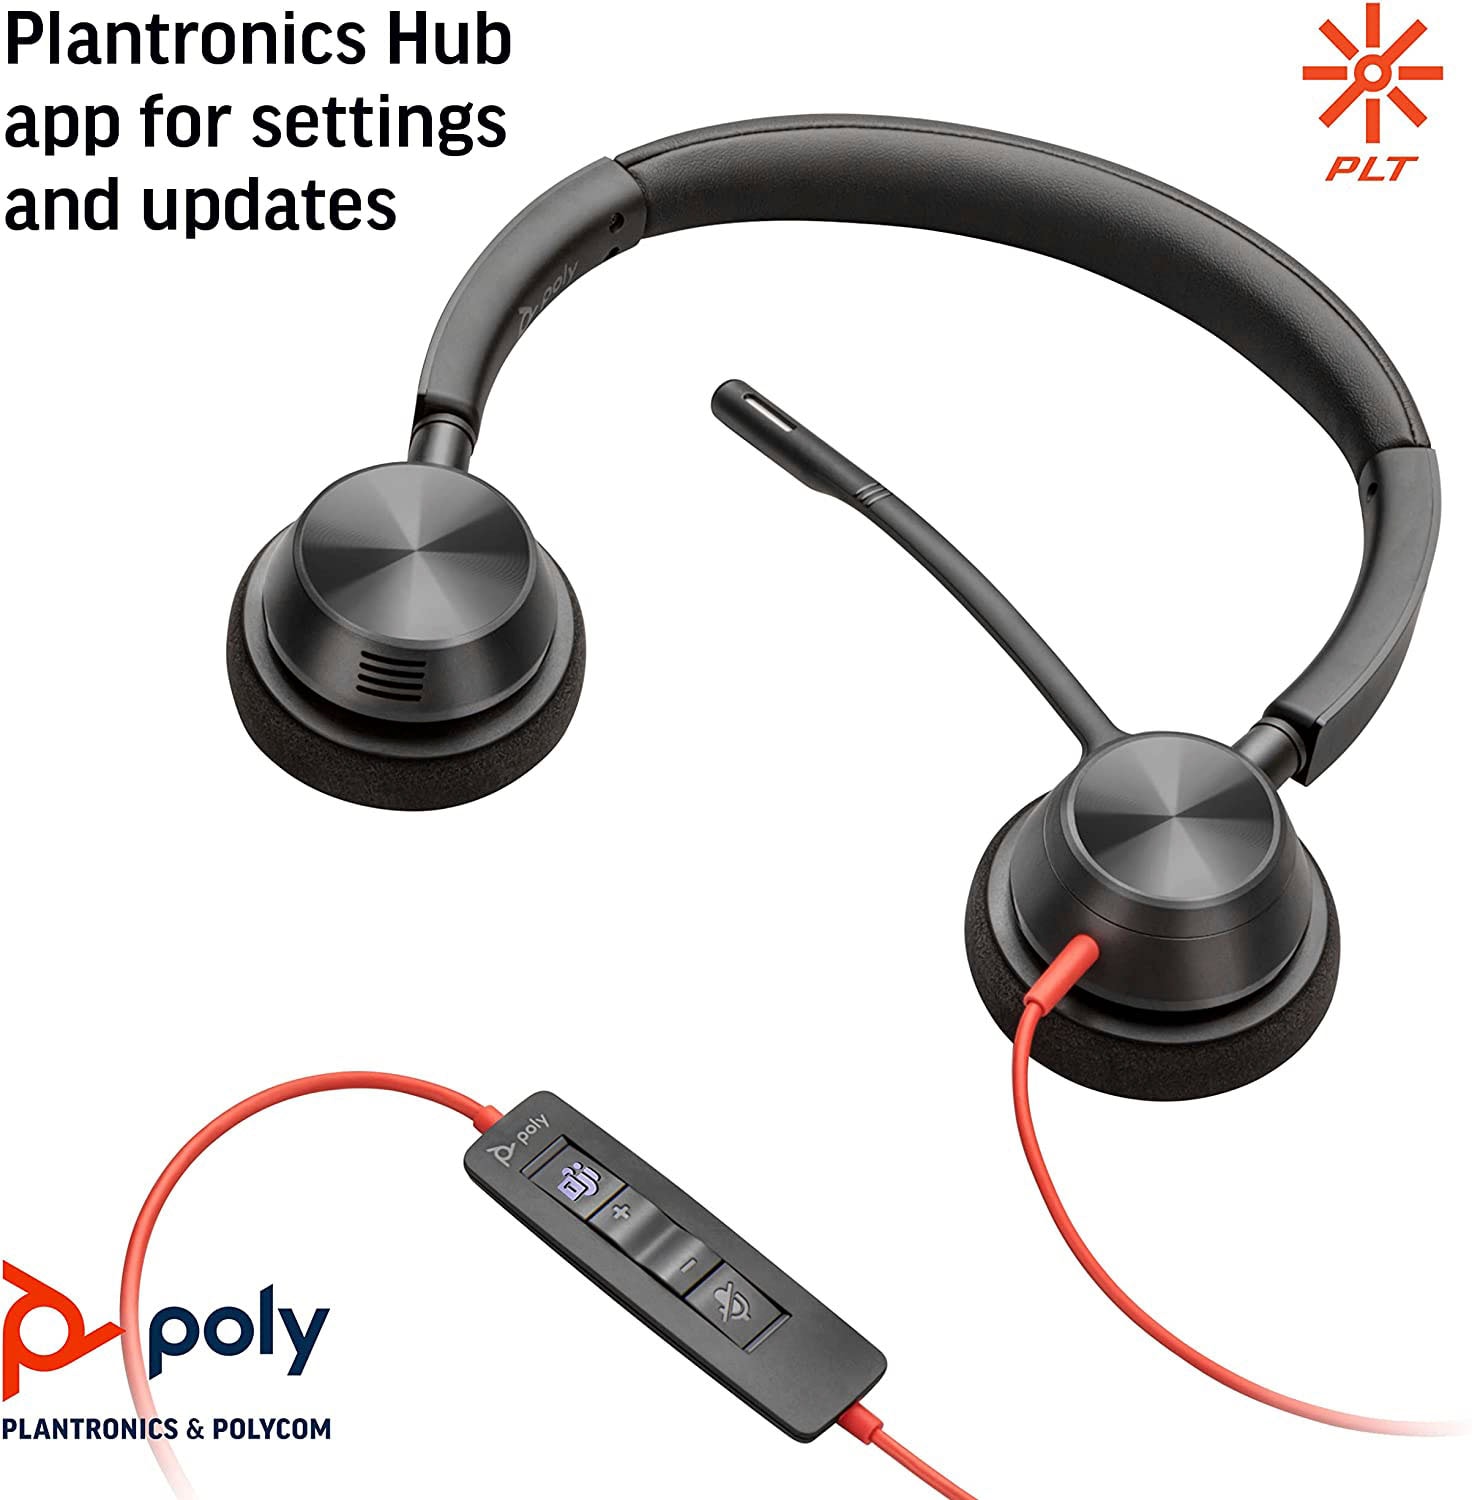 online 3325«, OTTO bei Headset Poly »Blackwire jetzt Noise-Cancelling